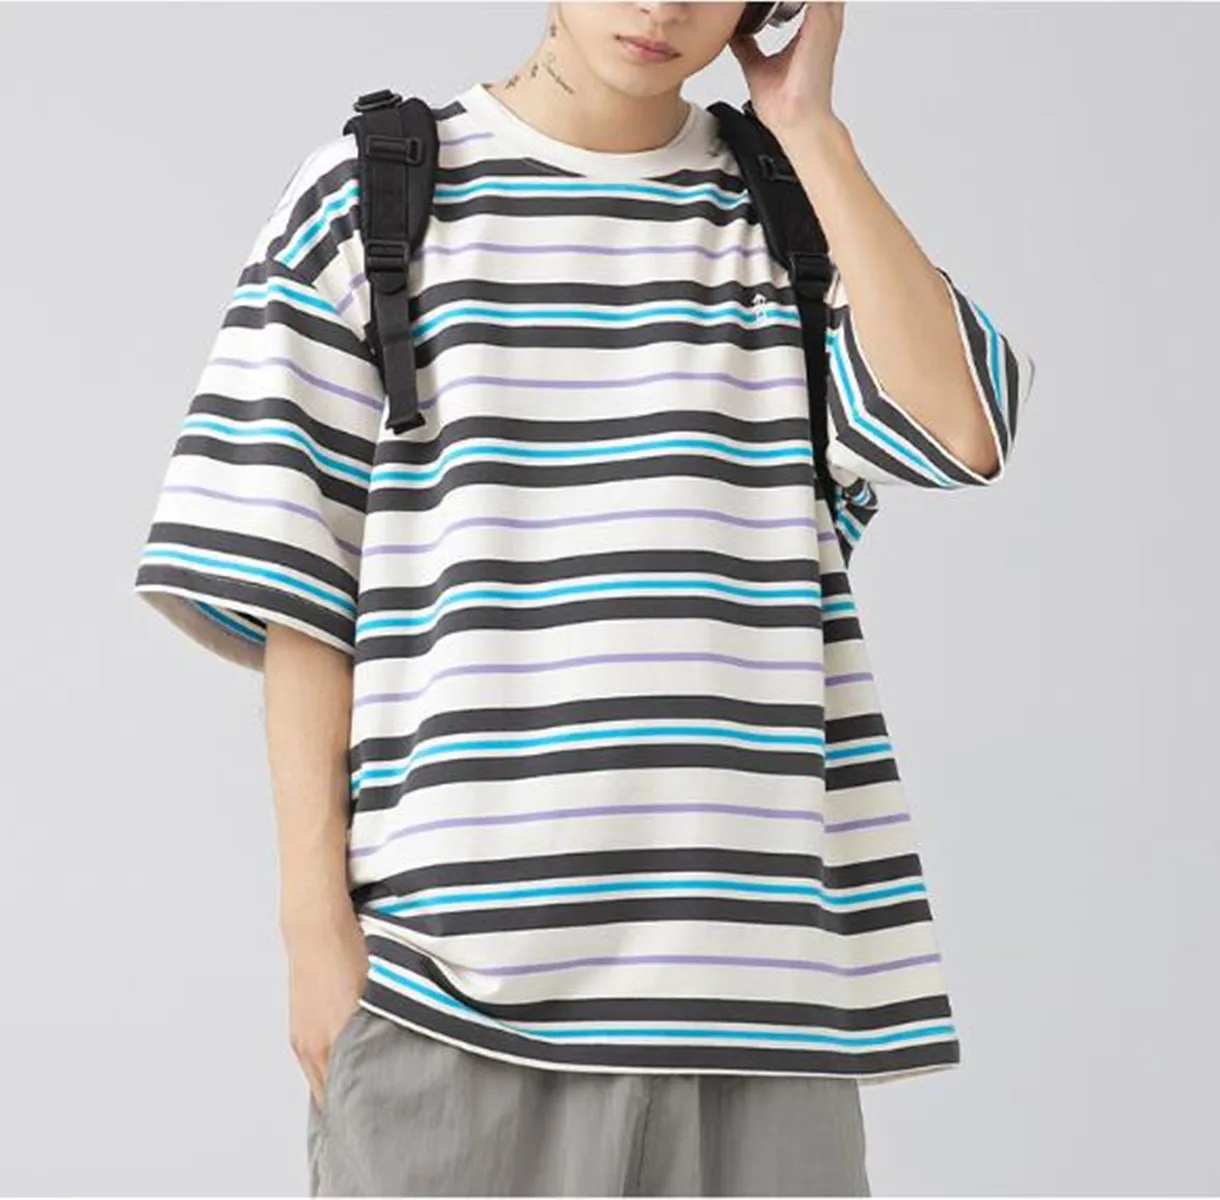 Men Cotton T-Shirt Summer Fashion Solid Color Striped Print Shirt  Casual Street Short Male Tops